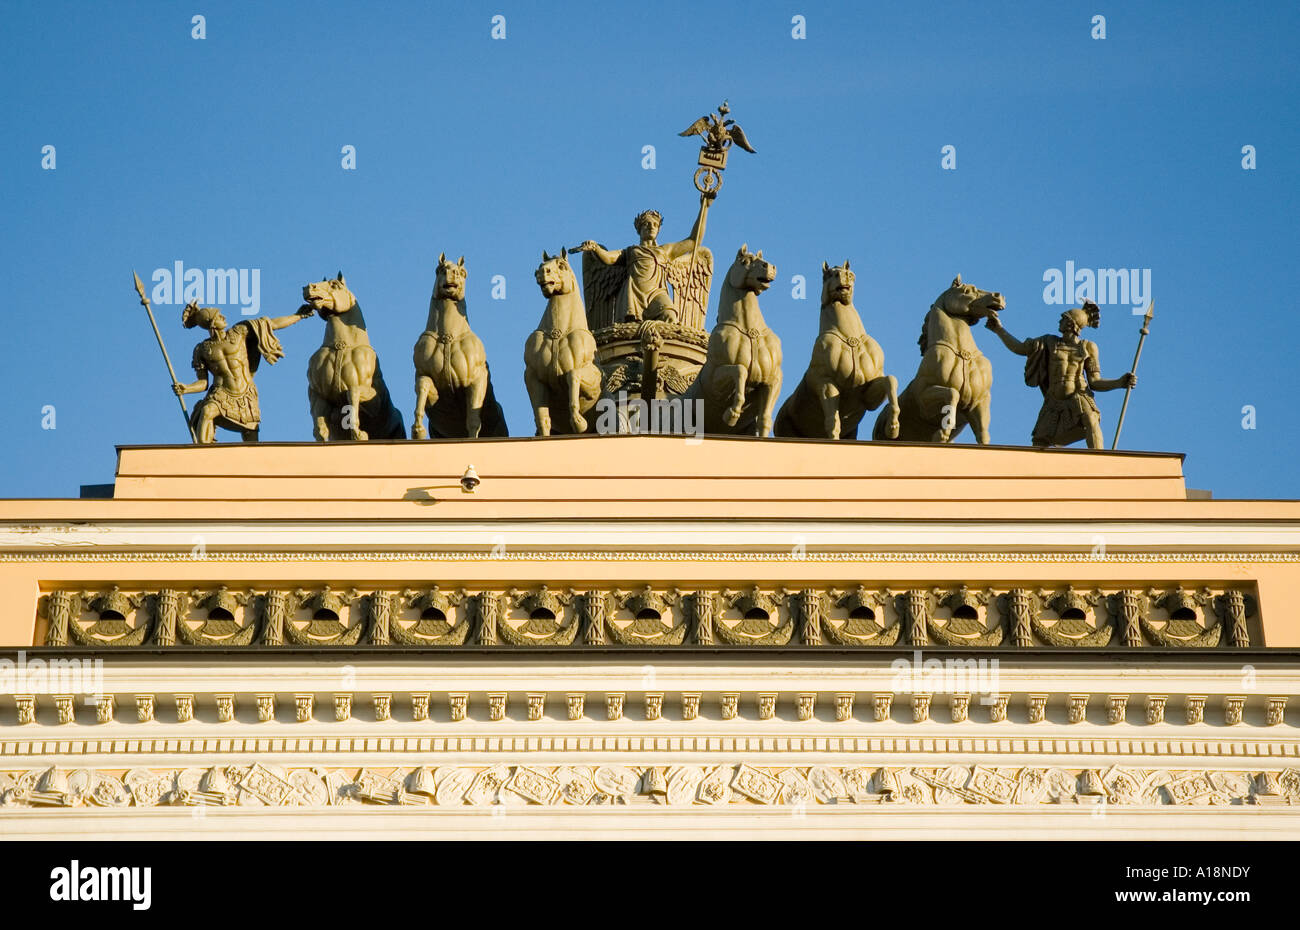 Scene from Palace Square in Saint Petersburg Russia Stock Photo